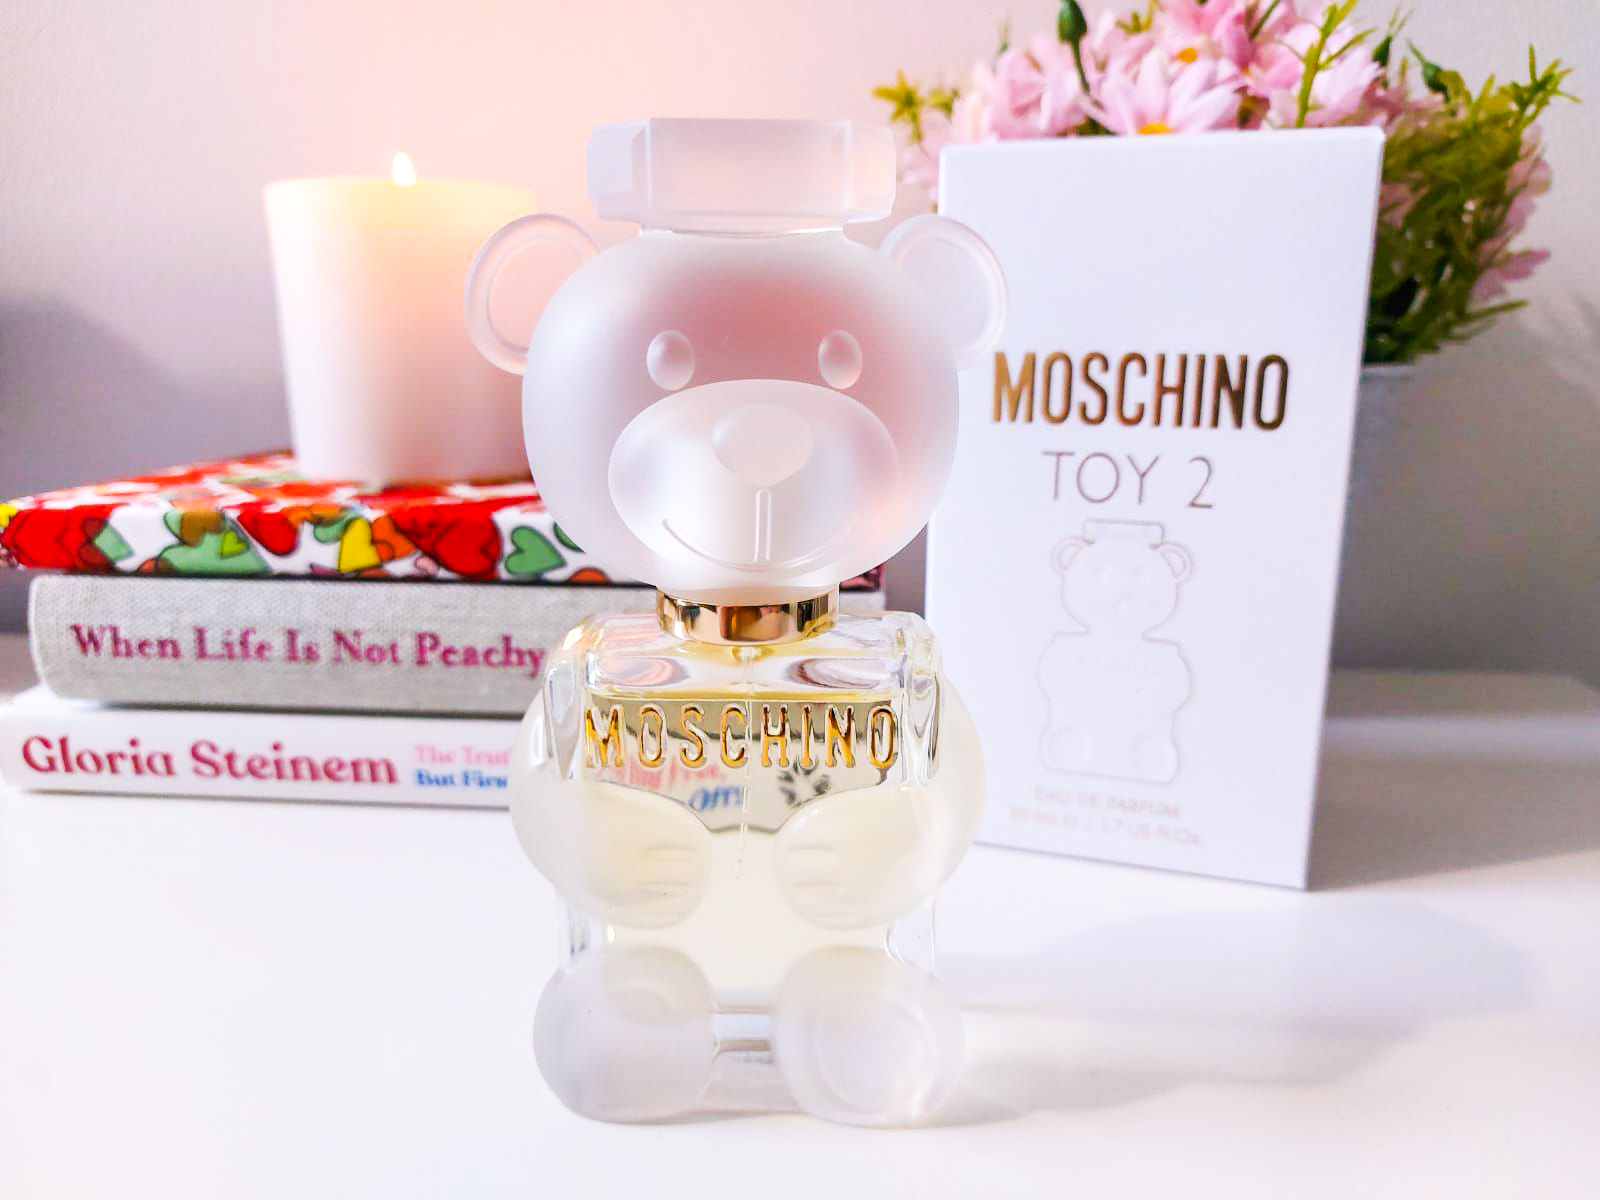 moschino toy 2 review